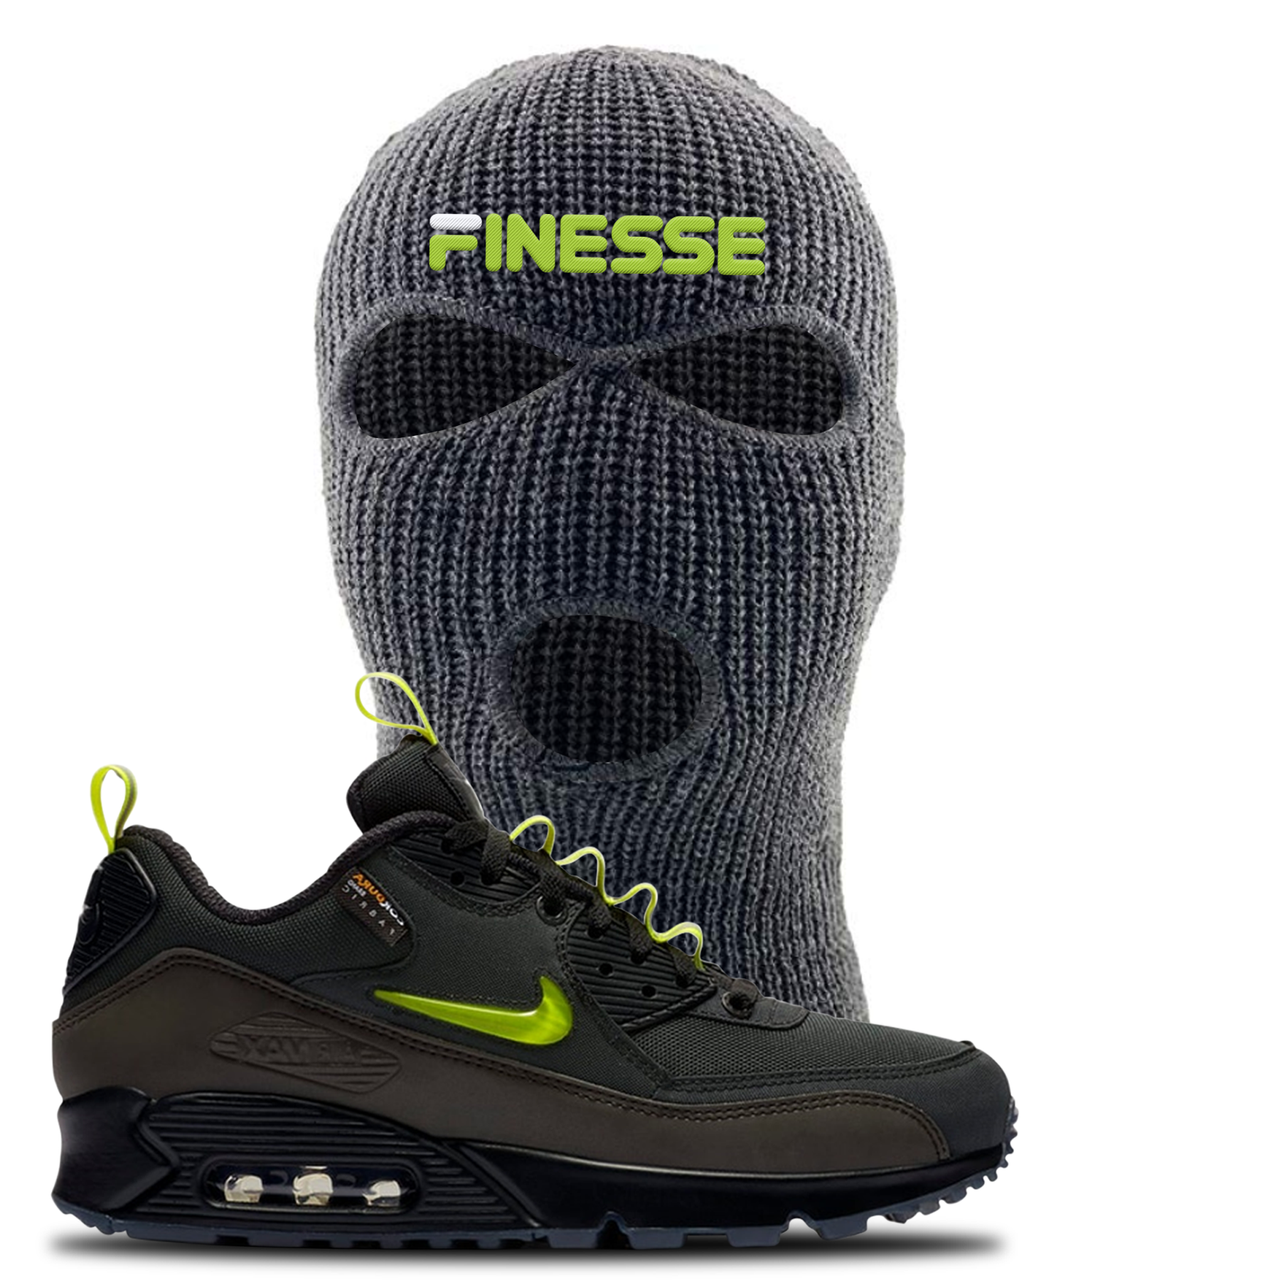 The Basement X Air Max 90 Manchester Finesse Dark Gray Sneaker Hook Up Ski Mask